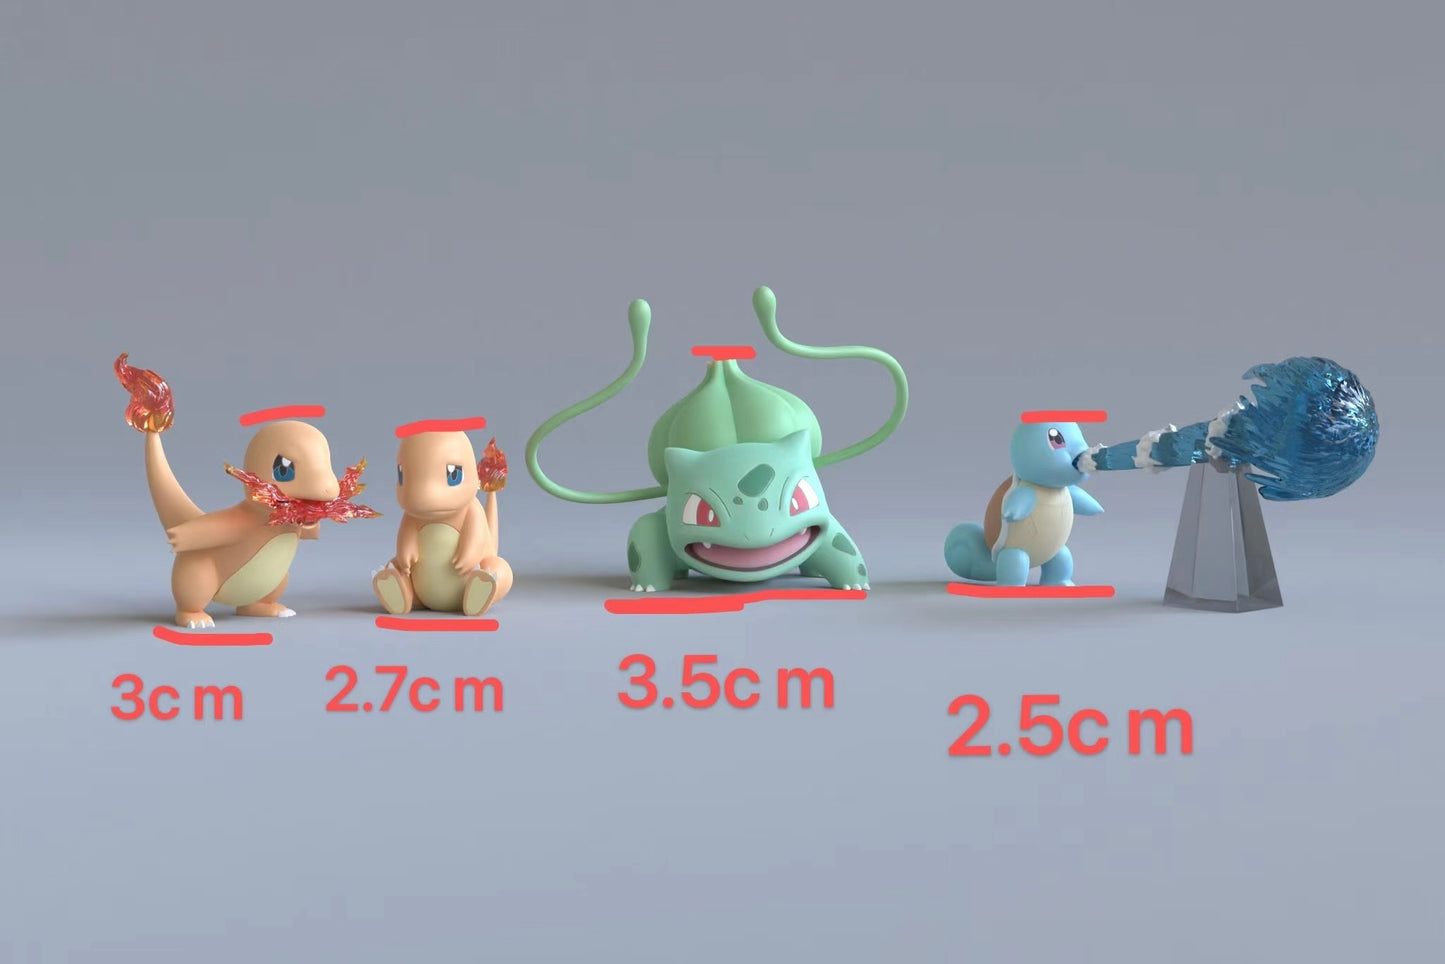 [PREORDER CLOSED] 1/20 Scale World Figure [MOON Studio] - Bulbasaur & Charmander & Squirtle